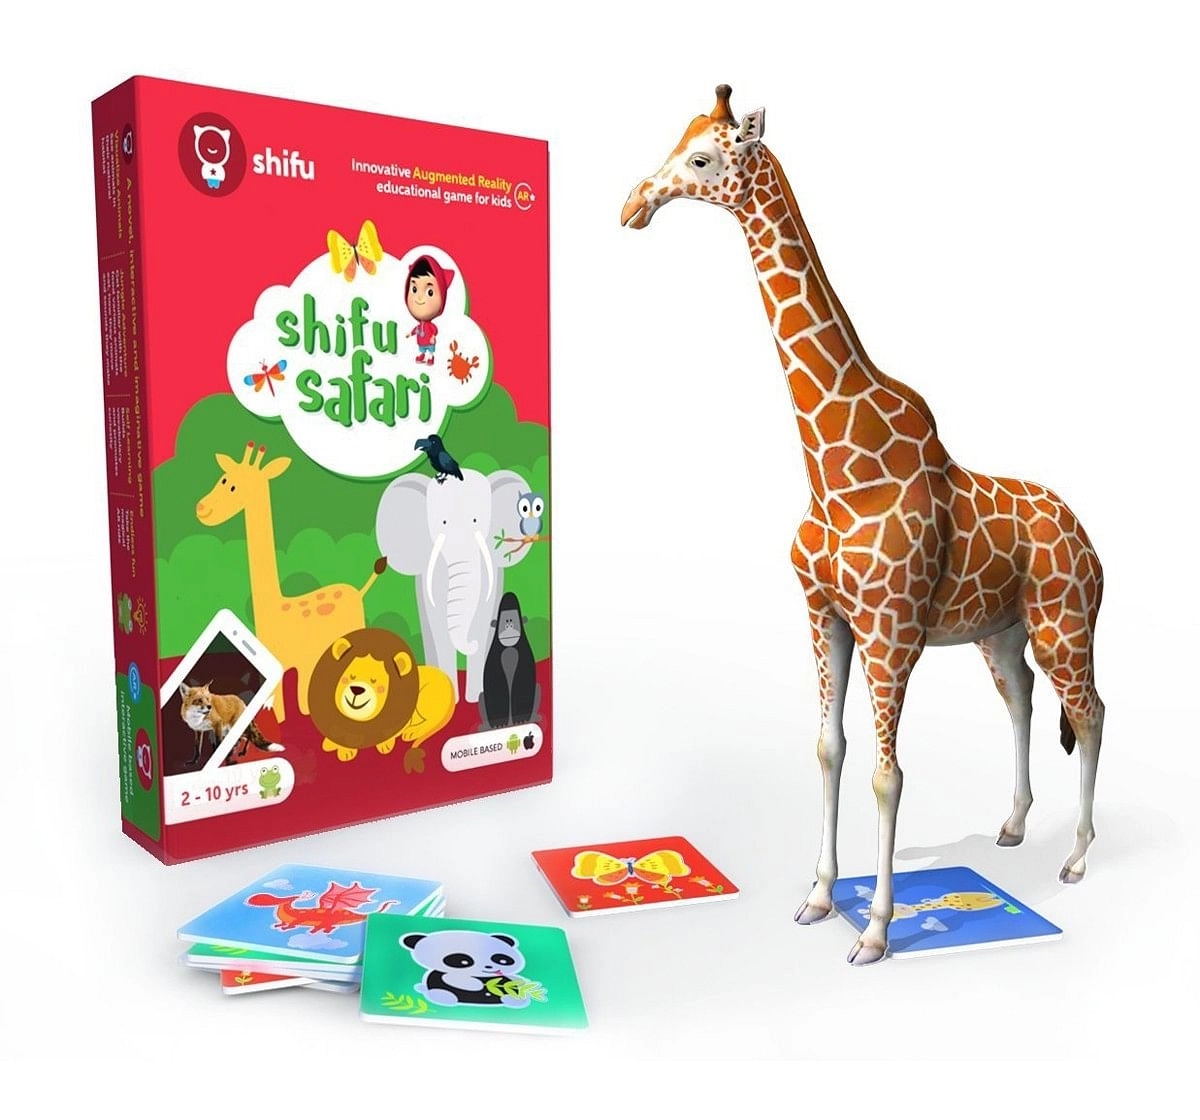 Playshifu Safari Augmented Reality Learning Games - Ios & Android (60 Animal Cards) Science Kits for Kids age 24M+ 